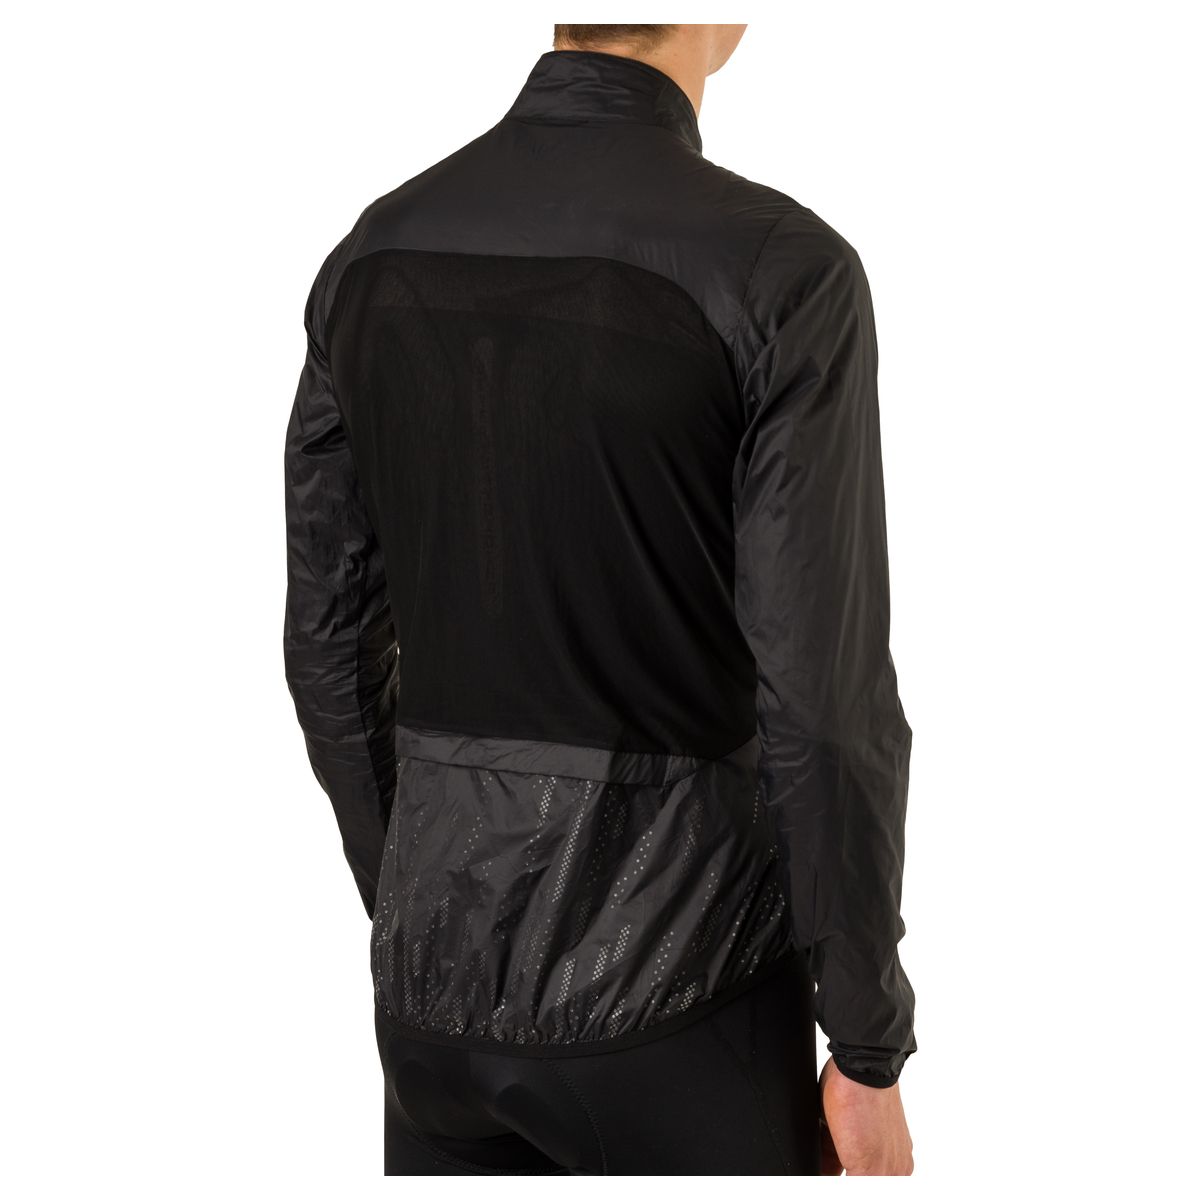 Wind Jacket II Essential Men Reflection fit example